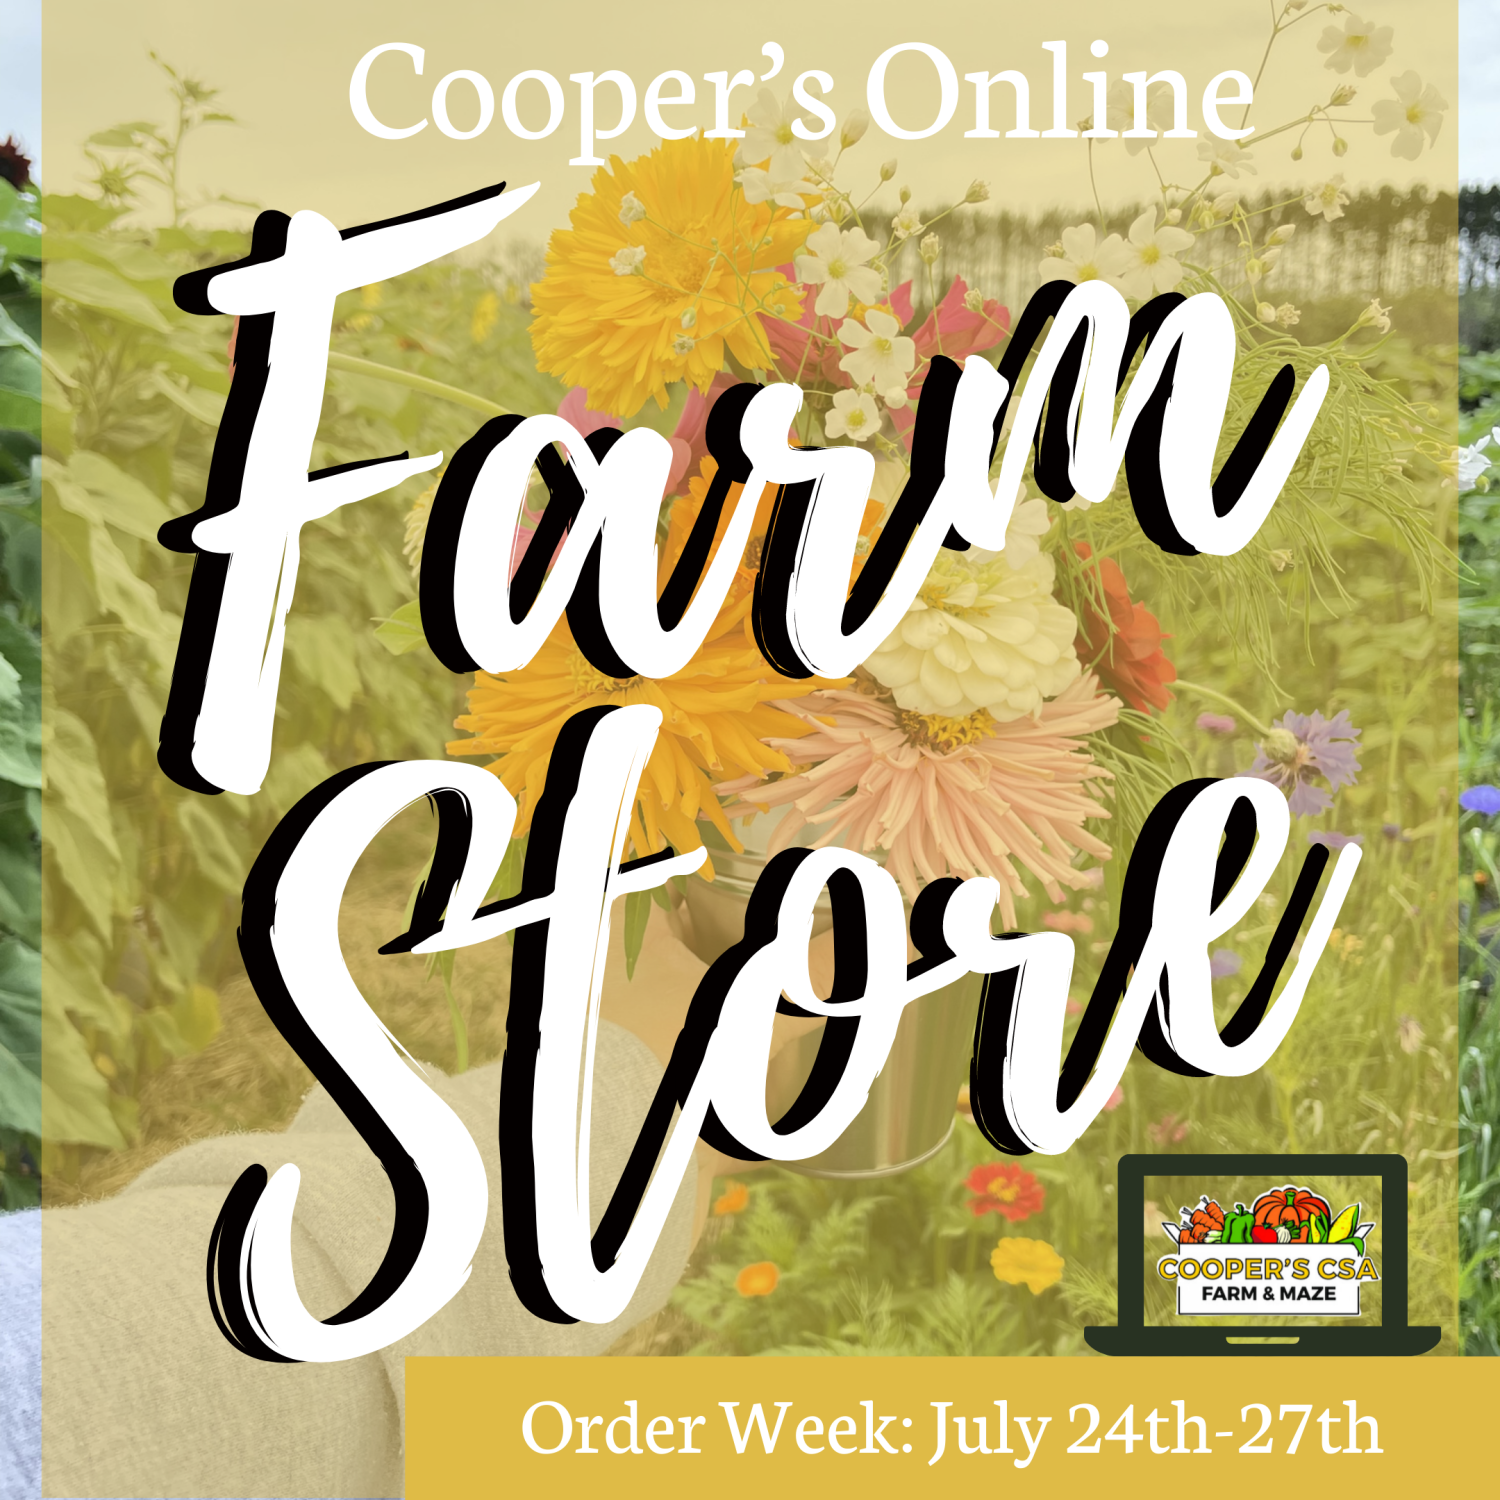 Next Happening: Coopers CSA Online FarmStore- Order week July 24th-27th